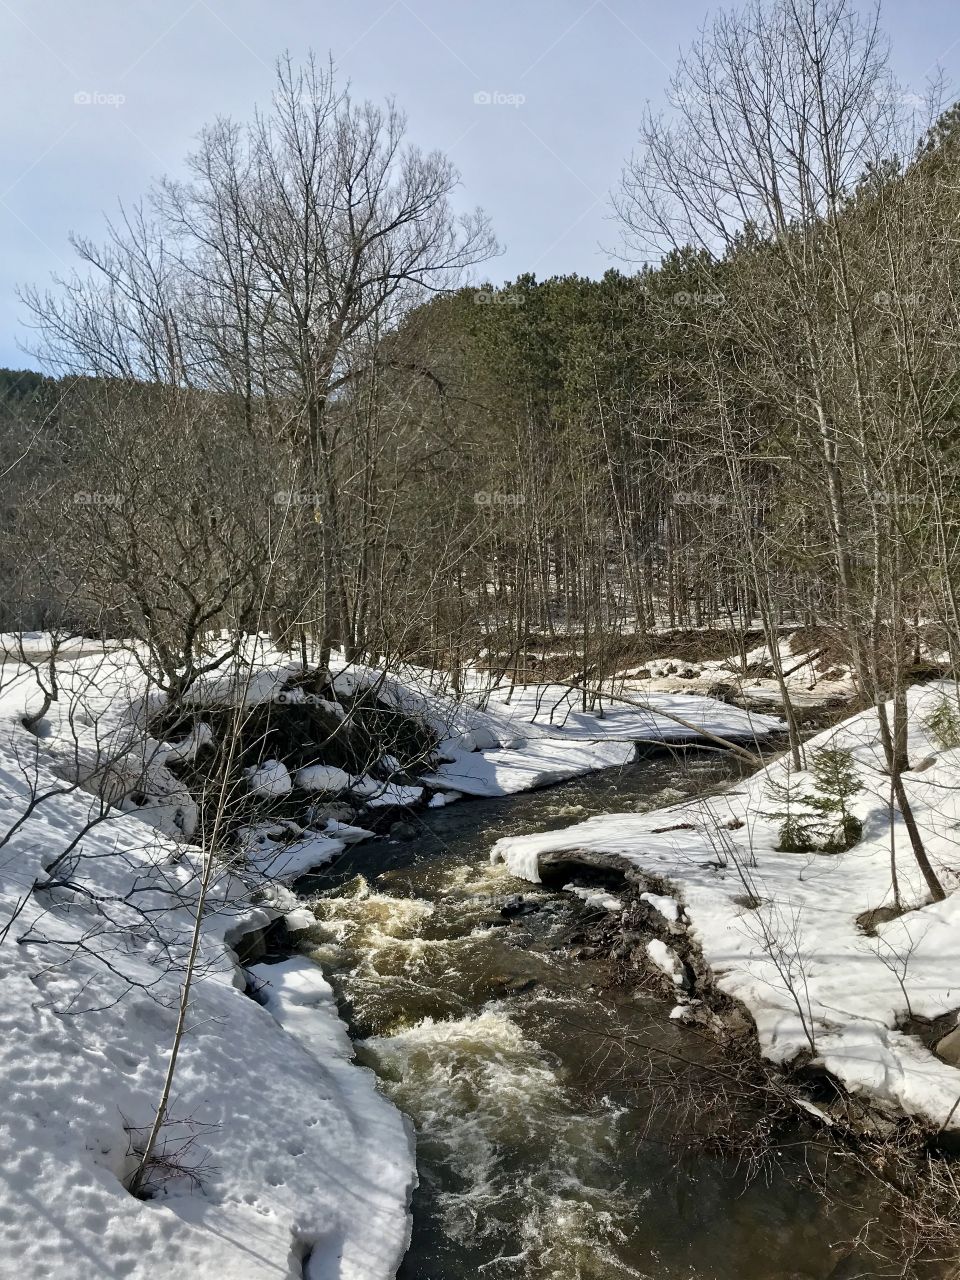 Whetstone Creek in the State Park